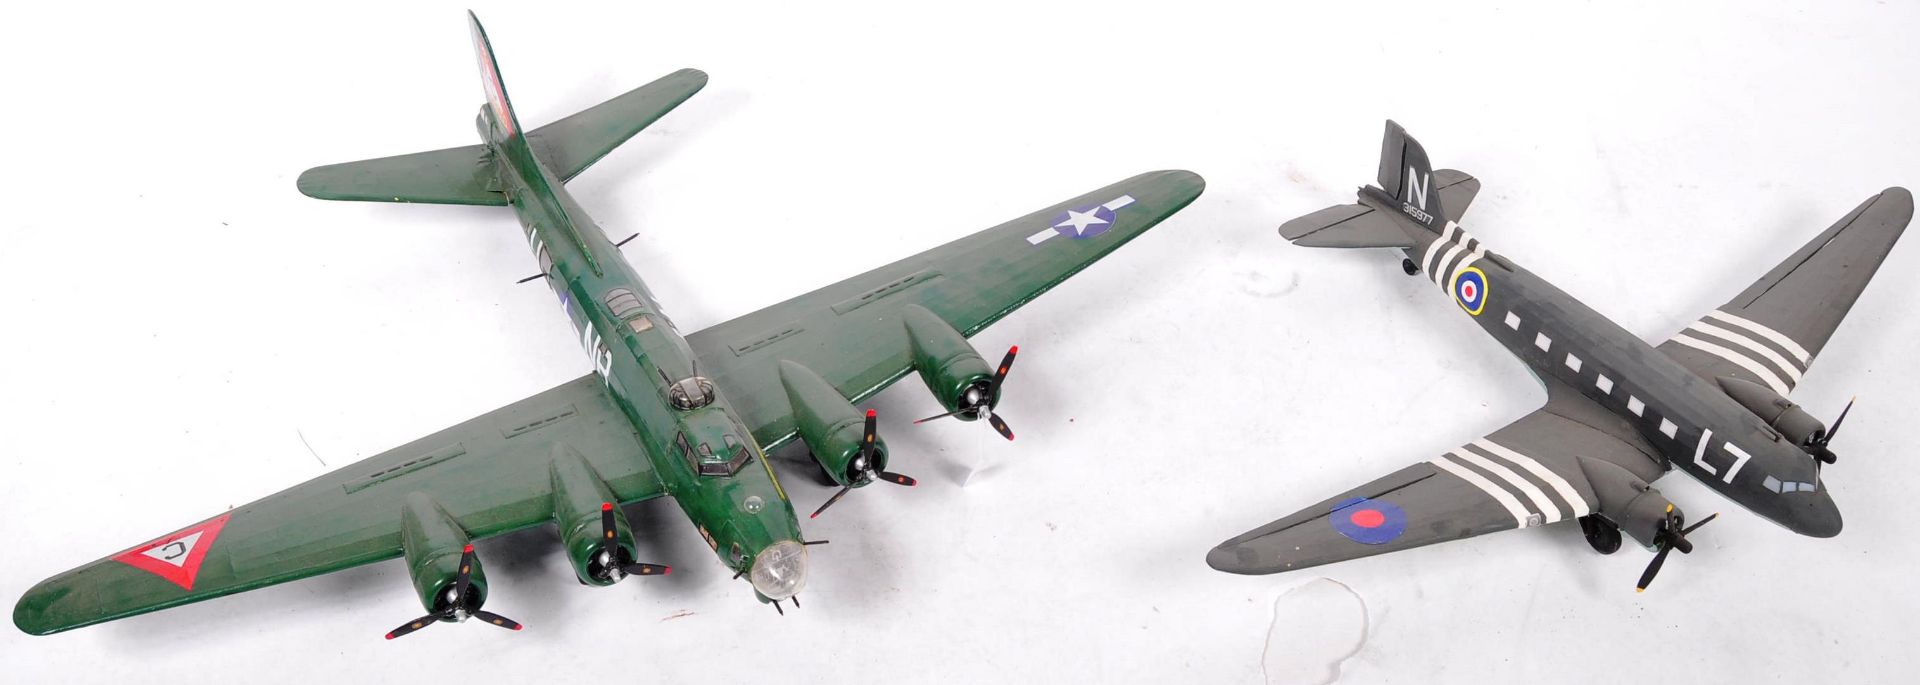 TWO WWII SECOND WORLD WAR BRITISH AND USA MODEL FIGHTER PLANES - Image 2 of 7